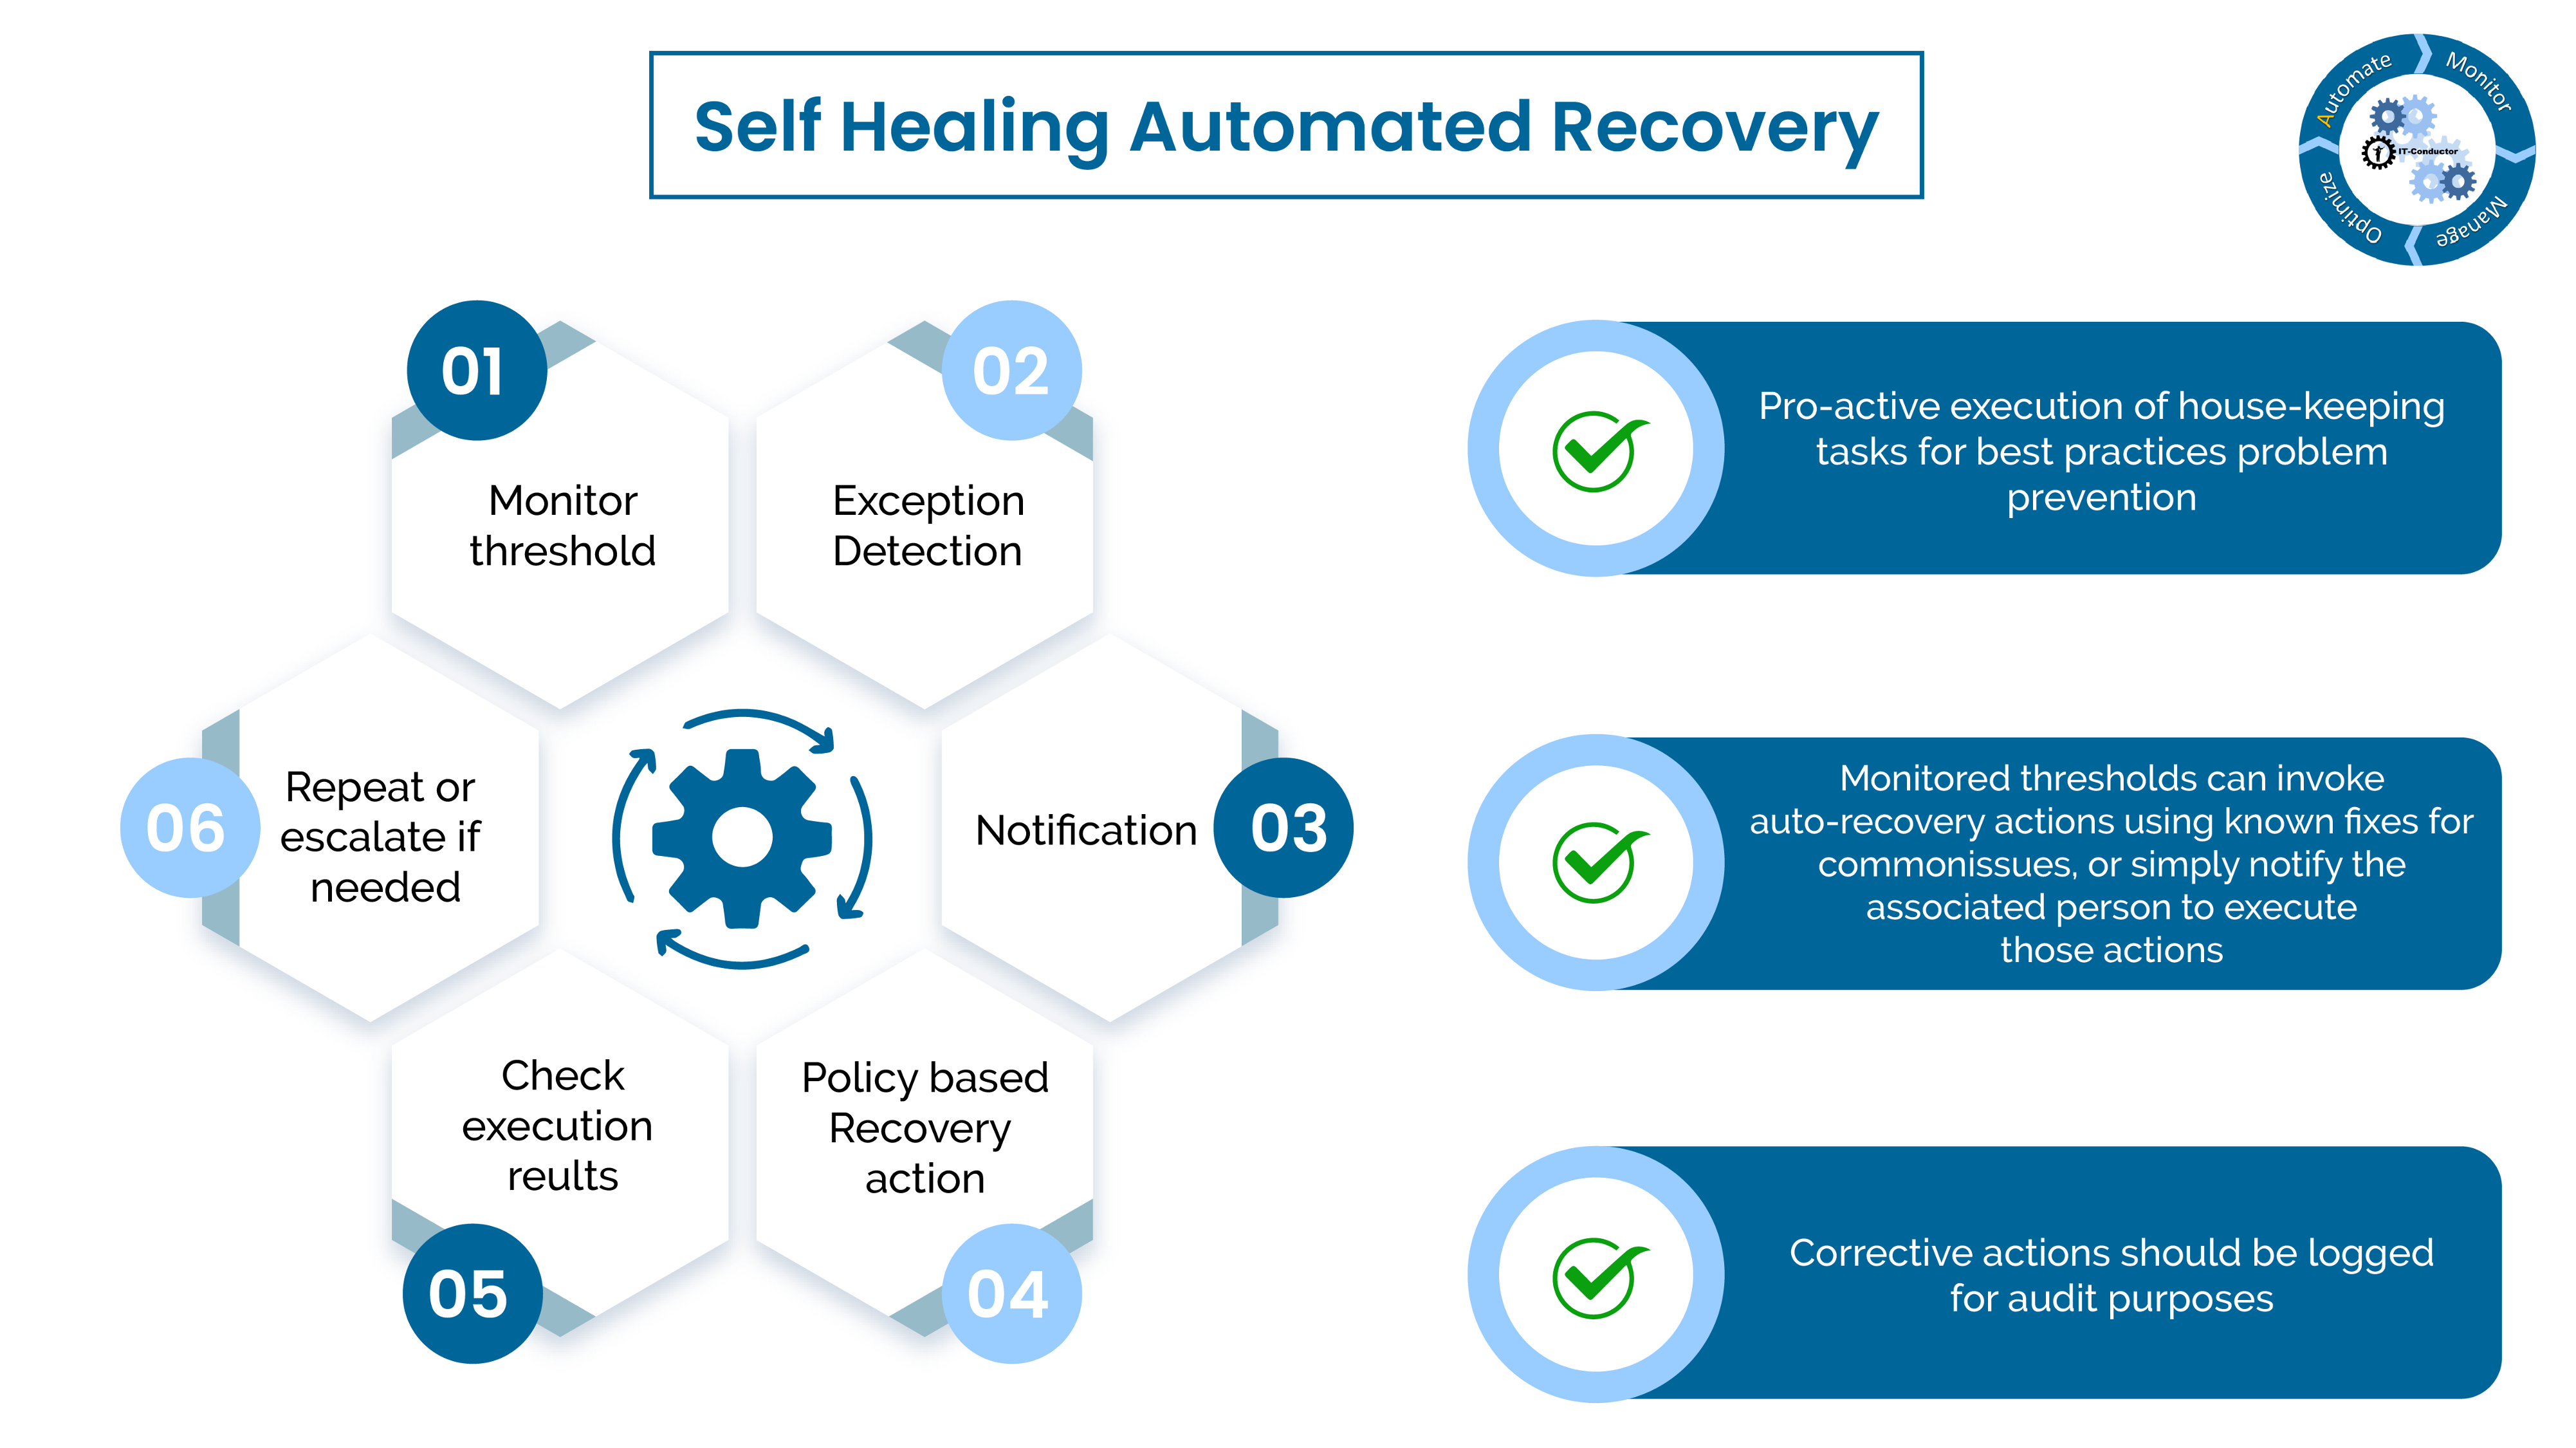 Self Healing Automated Recovery